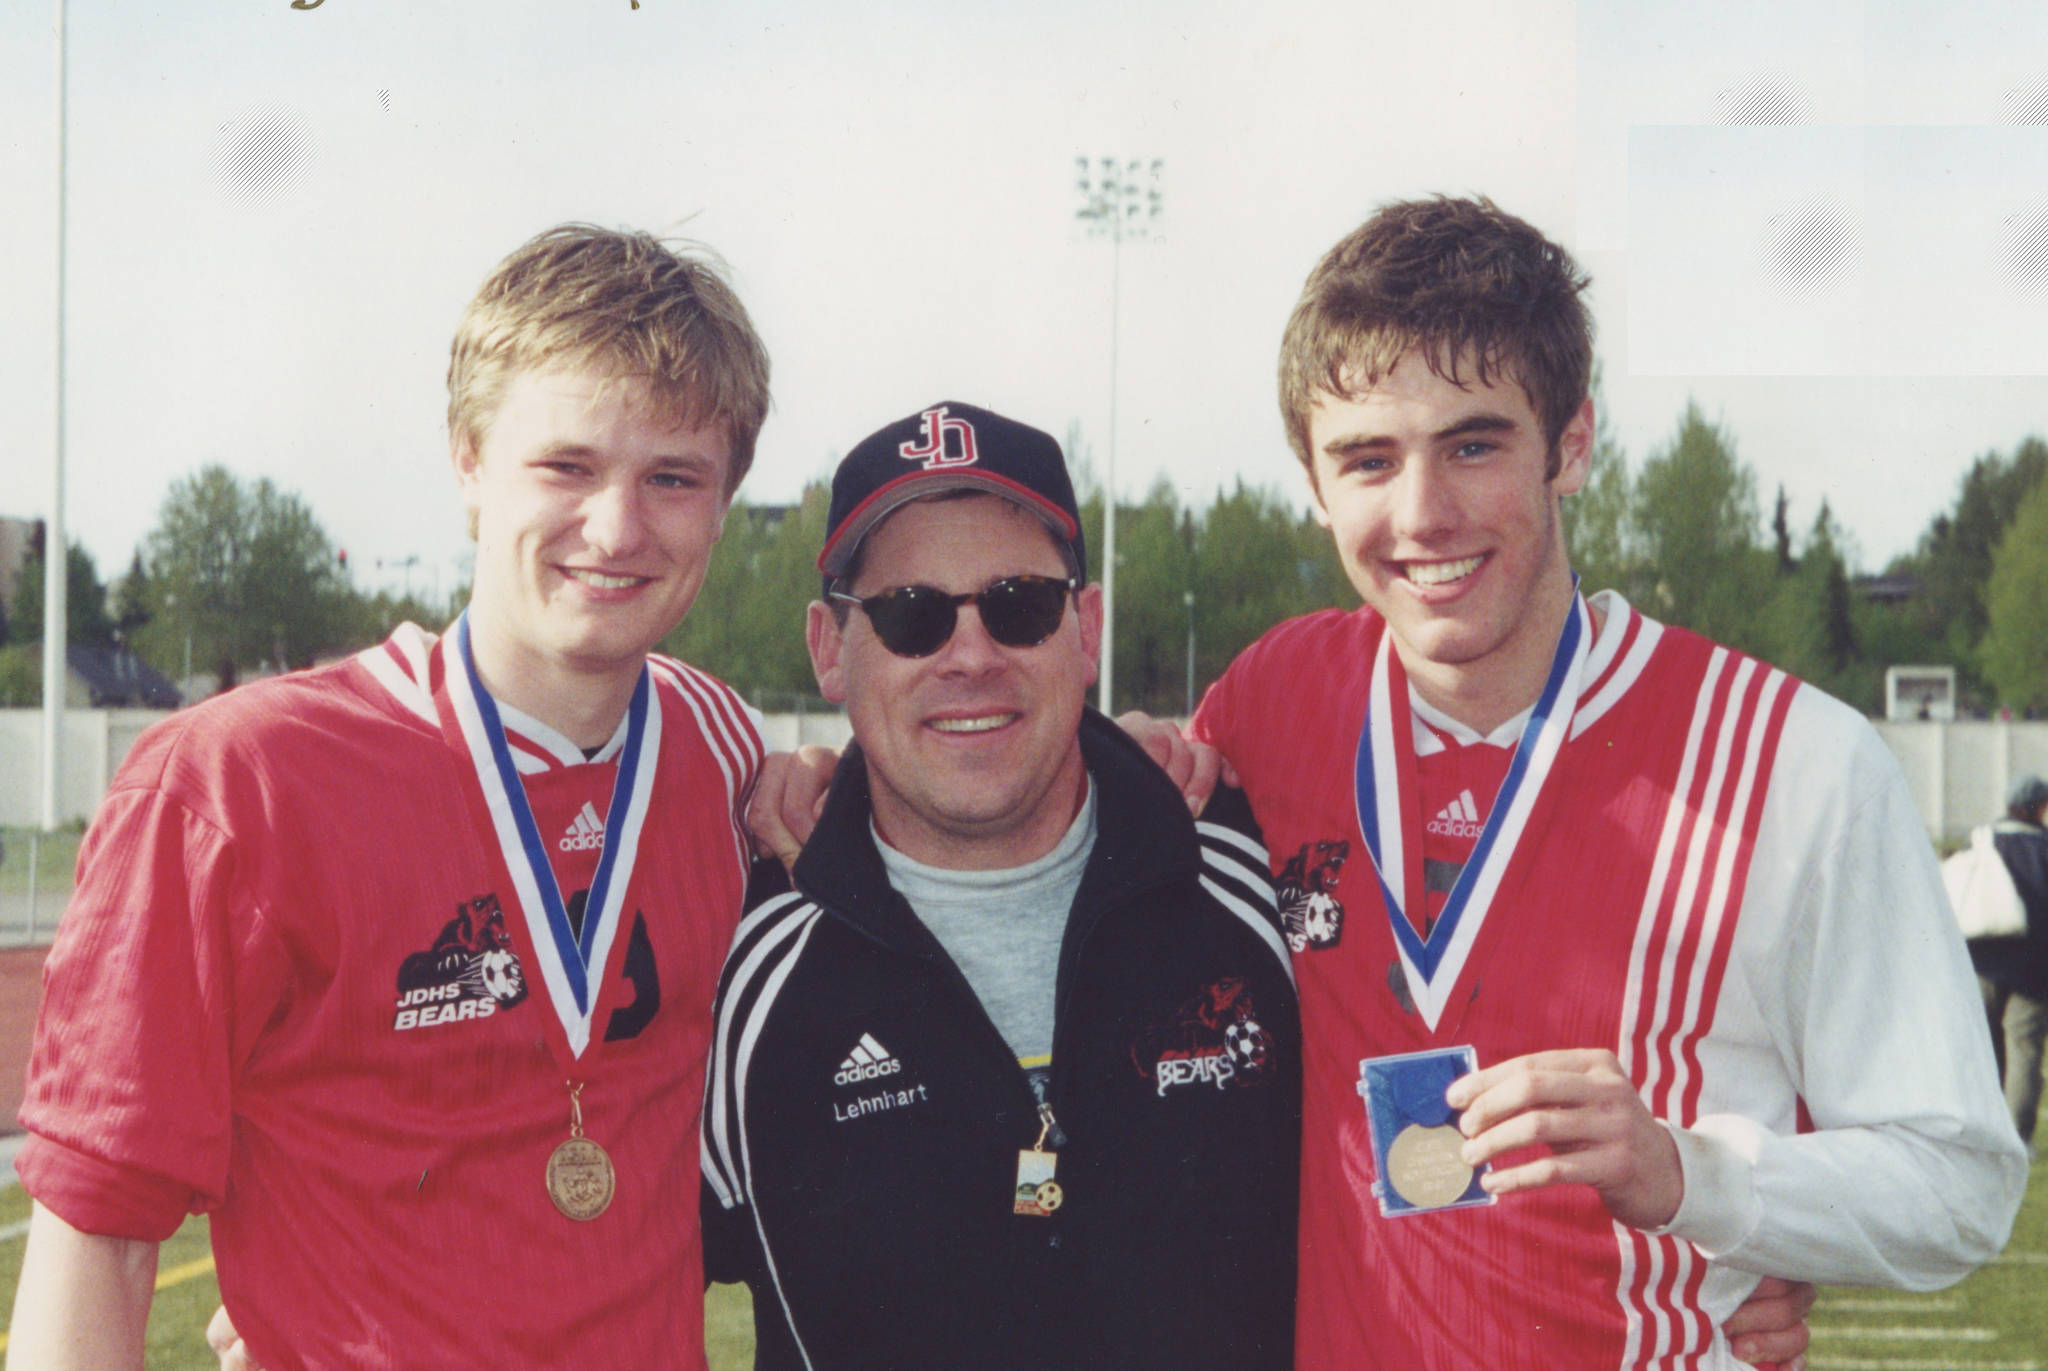 JDHS soccer’s Justin Dorn, left, coach Gary Lehnhart, and teammate Luke Knowles. Dorn will be inducted into the Alaska High School Hall of Fame. (Courtesy Photo | Gary Lehnhart)